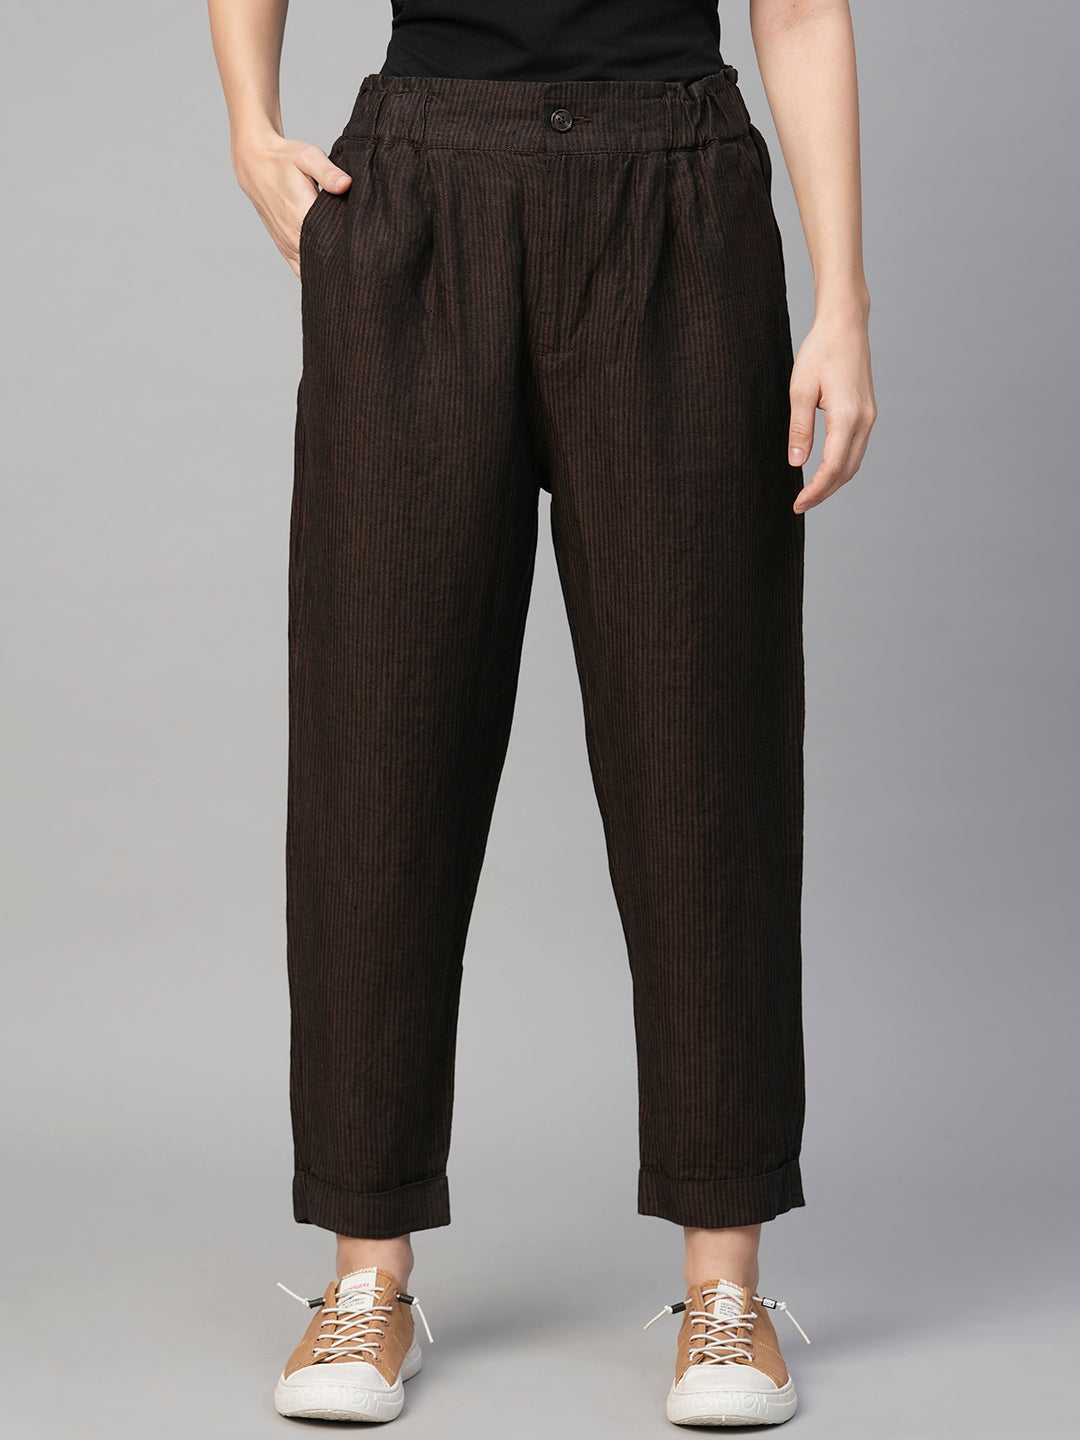 Buy Black Linen Pants Outfit Summer Casual Street Styles, Women's Wide Leg  Linen Pants With Pockets, Long Linen Palazzo Pants 0873 Online in India 